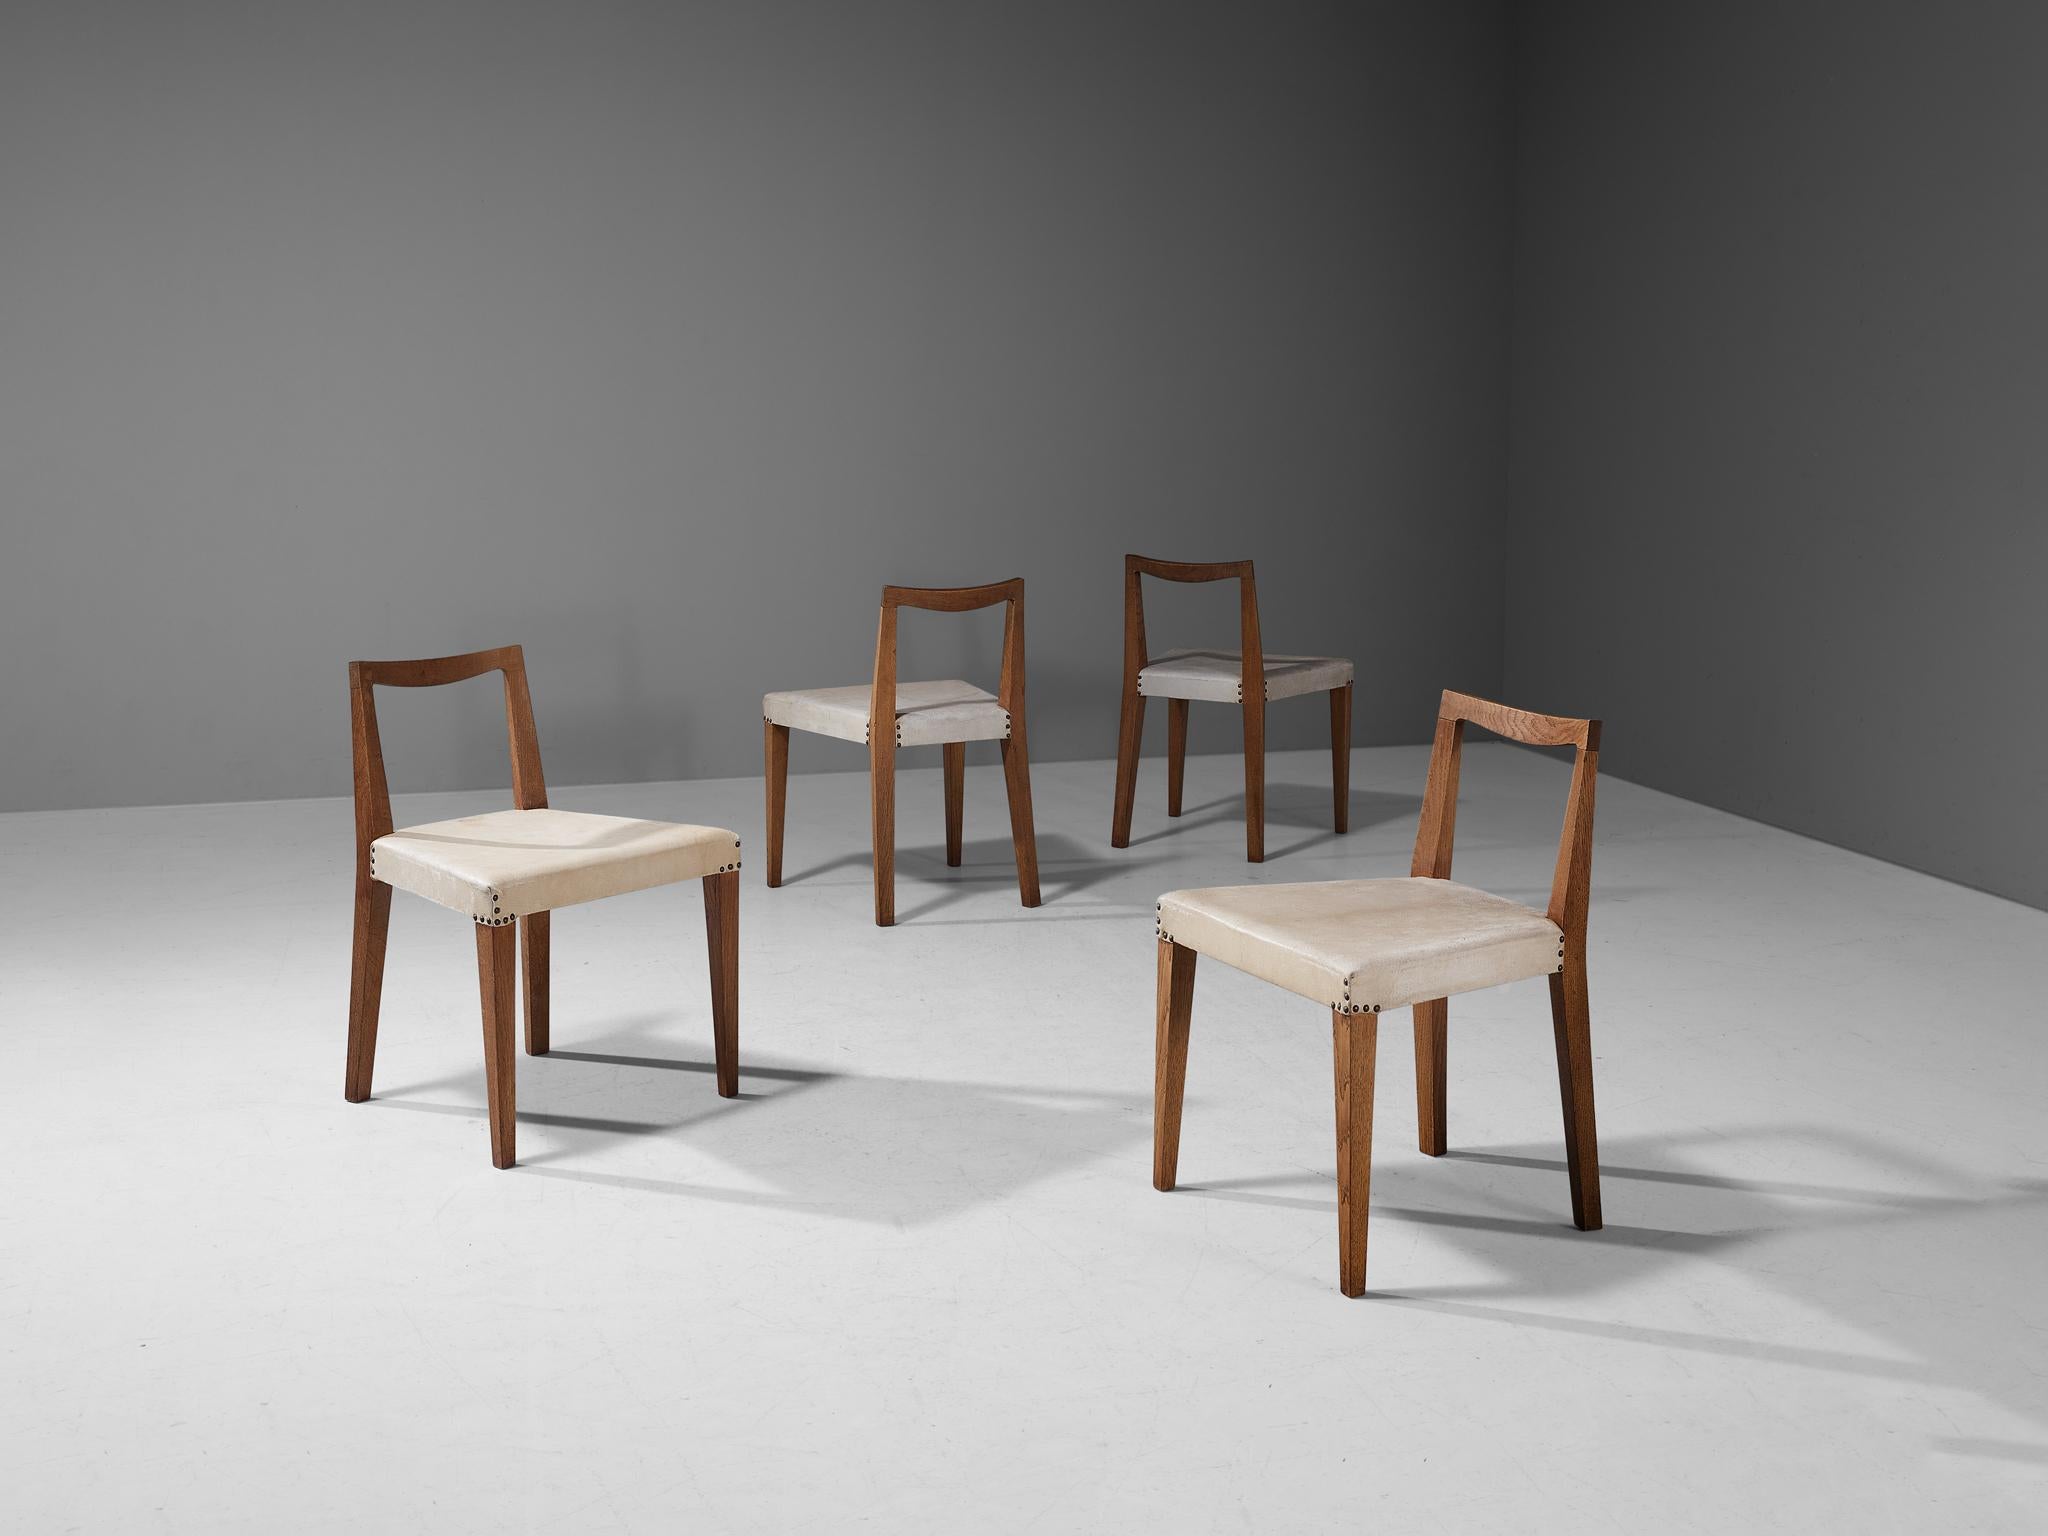 Set of four dining chairs, oak, leather, brass, France, late 1940s 

This well-constructed set of four dining chairs of French origin embodies a splendid structure that shows a simplistic, natural and timeless aesthetics. The design is